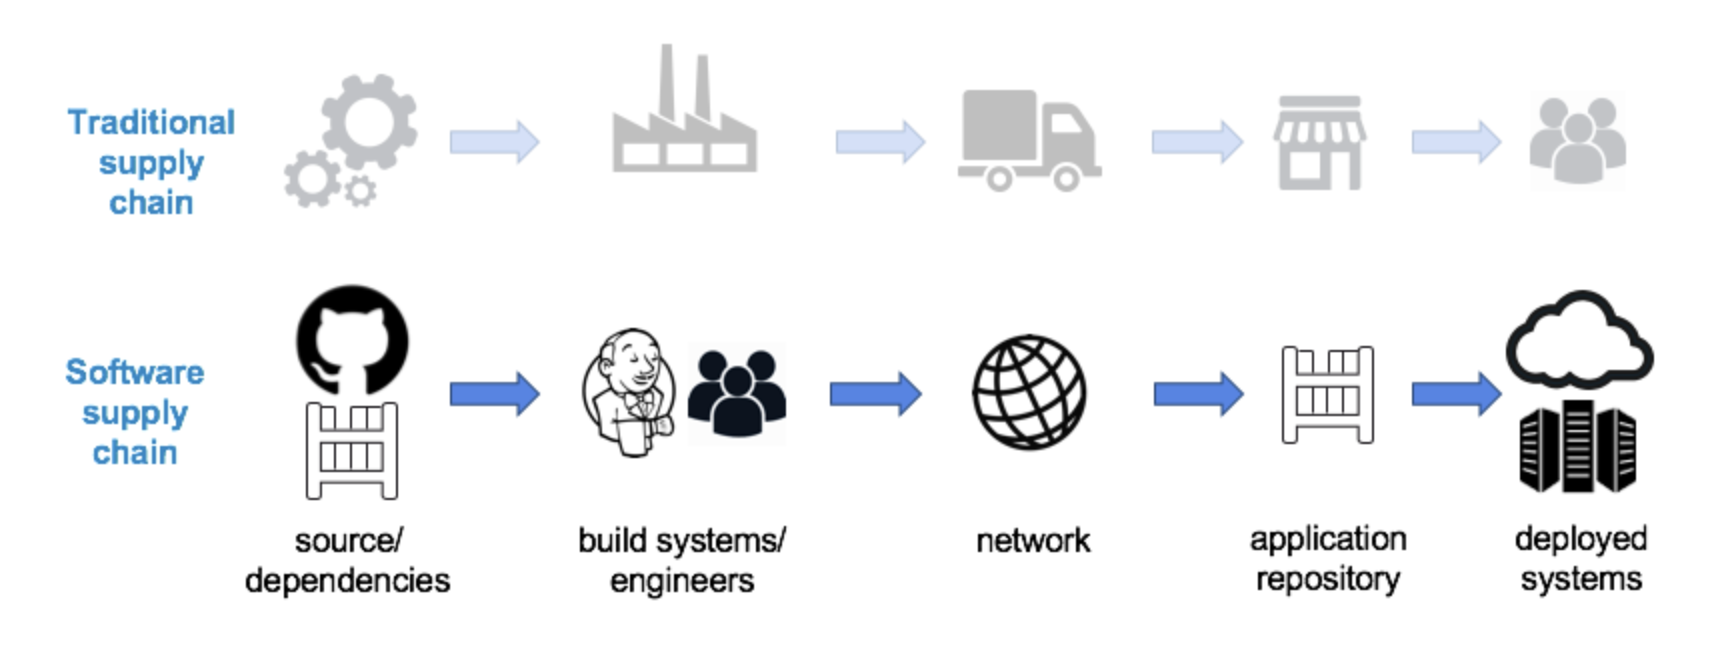 The supply chain concept applied to the Software Industry